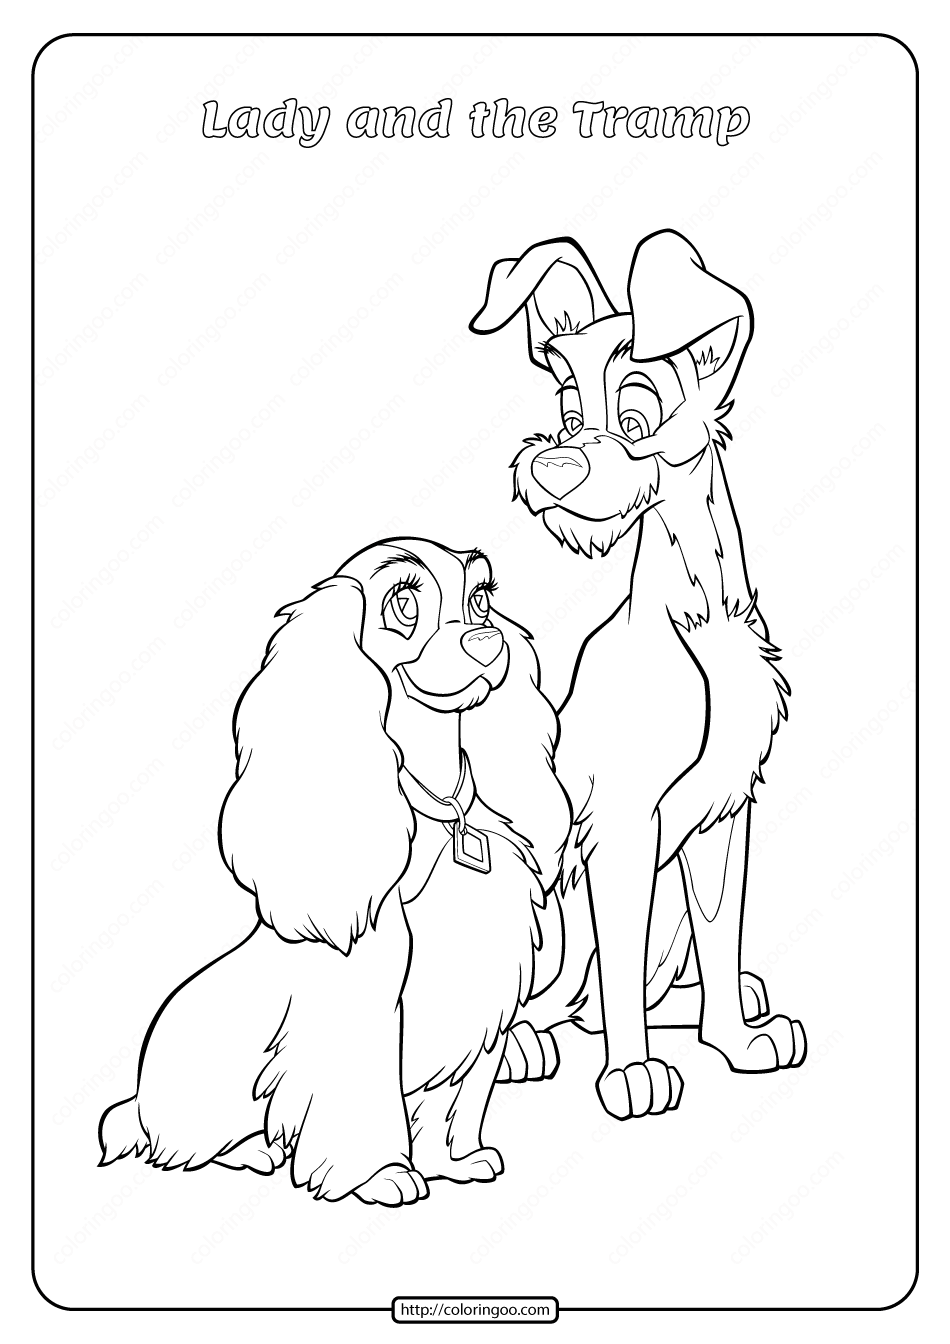 Printable Lady and the Tramp Coloring Page 07